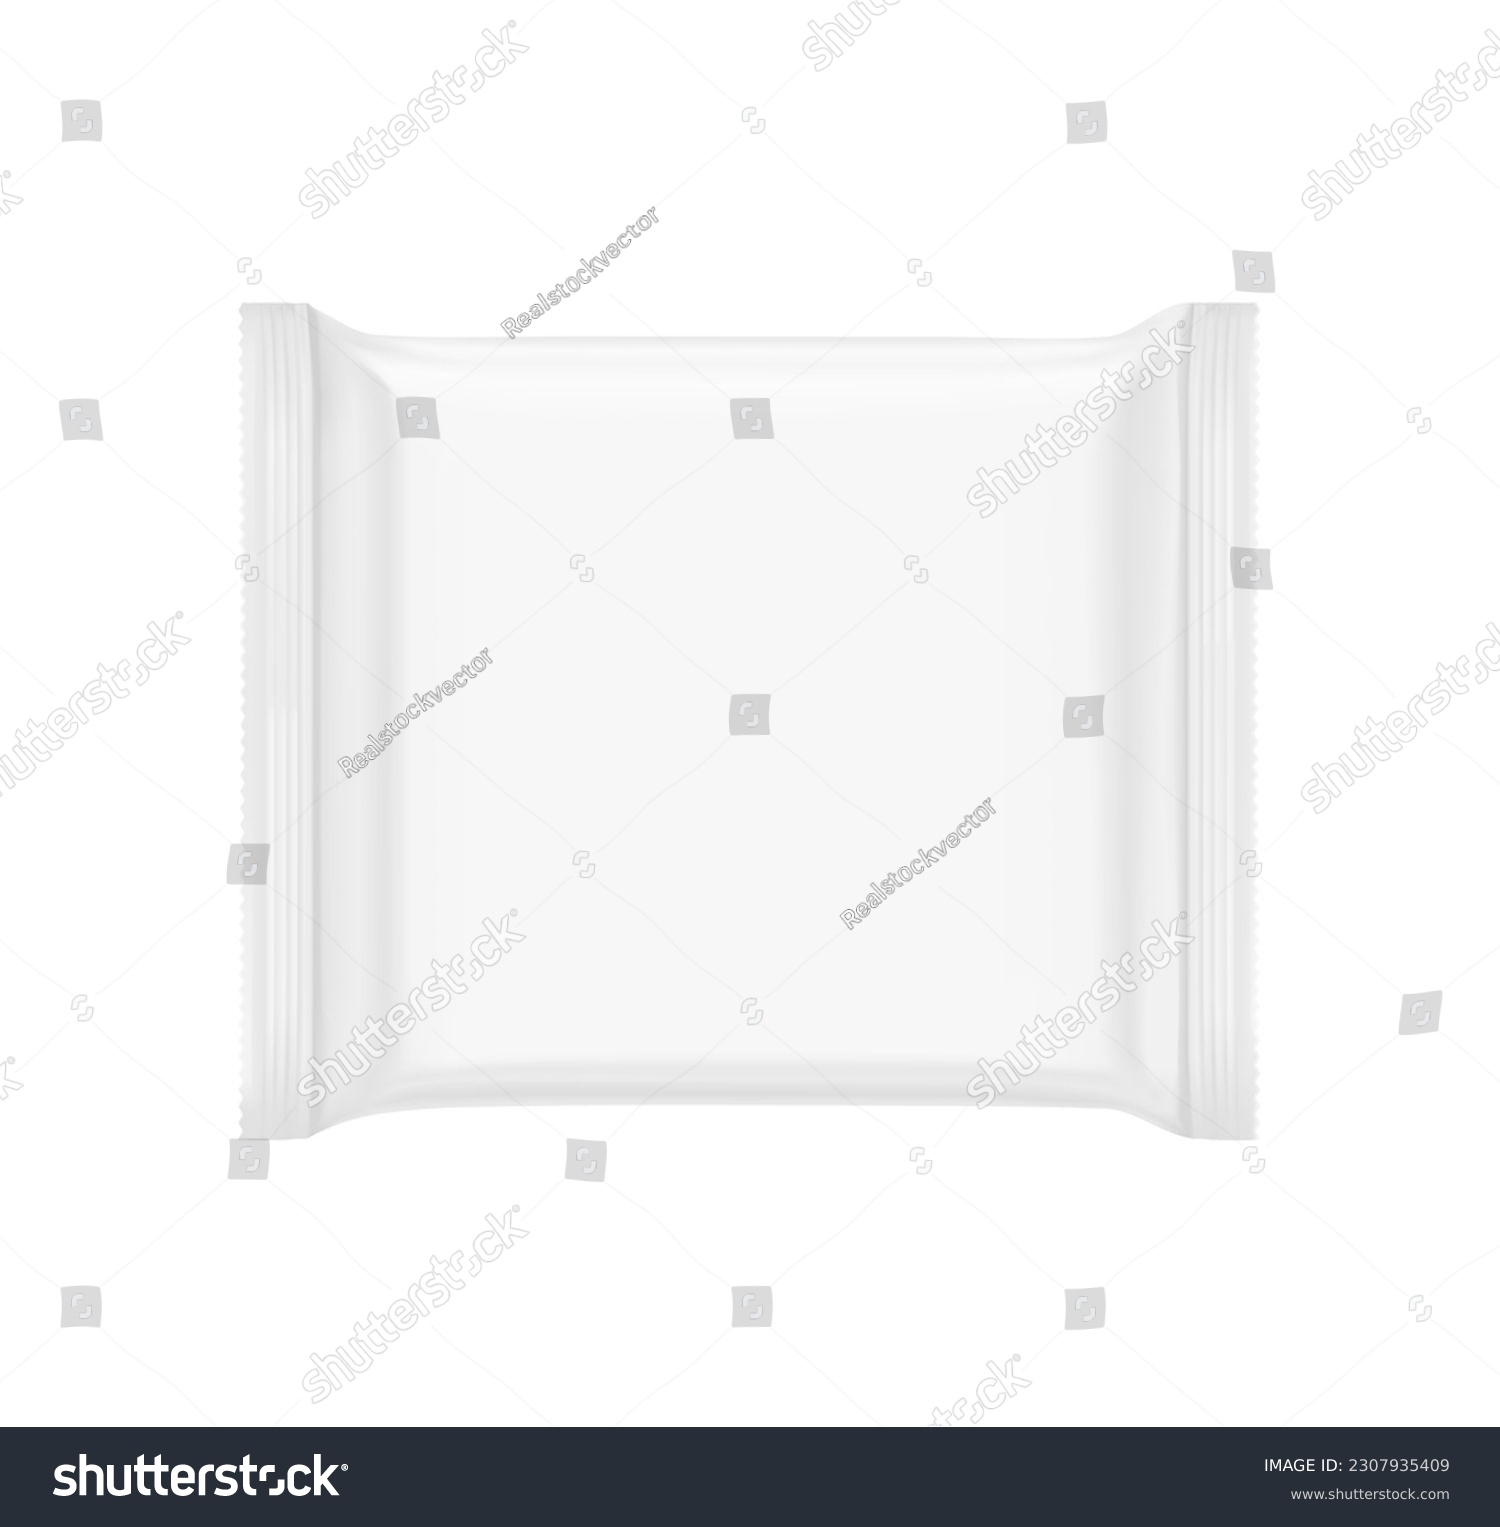 Hight realistic square flow packaging mockup. Vector illustration isolated on white background. Can be use for your design, promo, adv and etc. Possibility for food, candy, cosmetic. EPS10.	 #2307935409